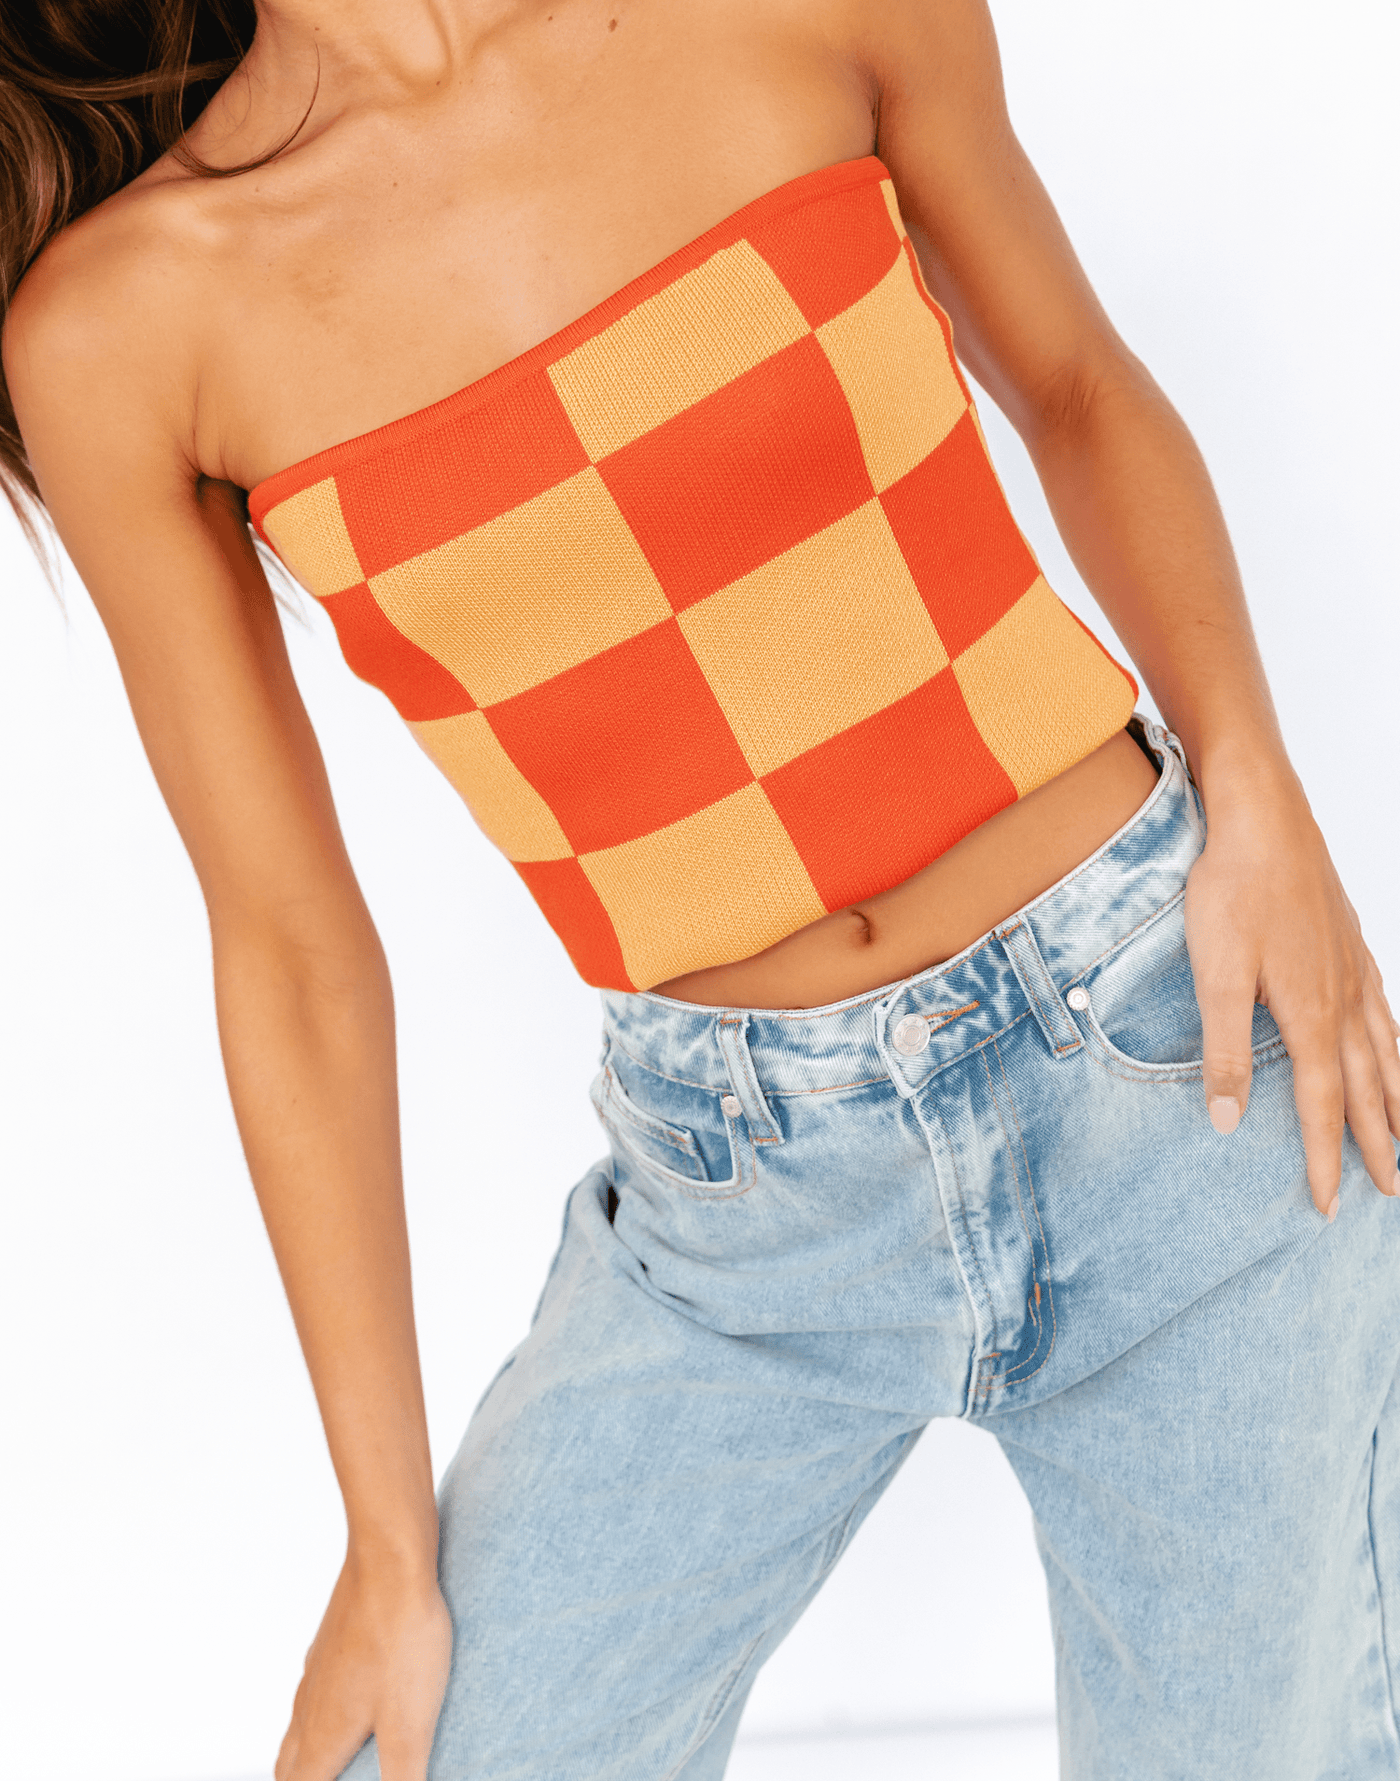 Blake Strapless Top (Red/Orange) - Checkered Printed Top - Women's Top - Charcoal Clothing